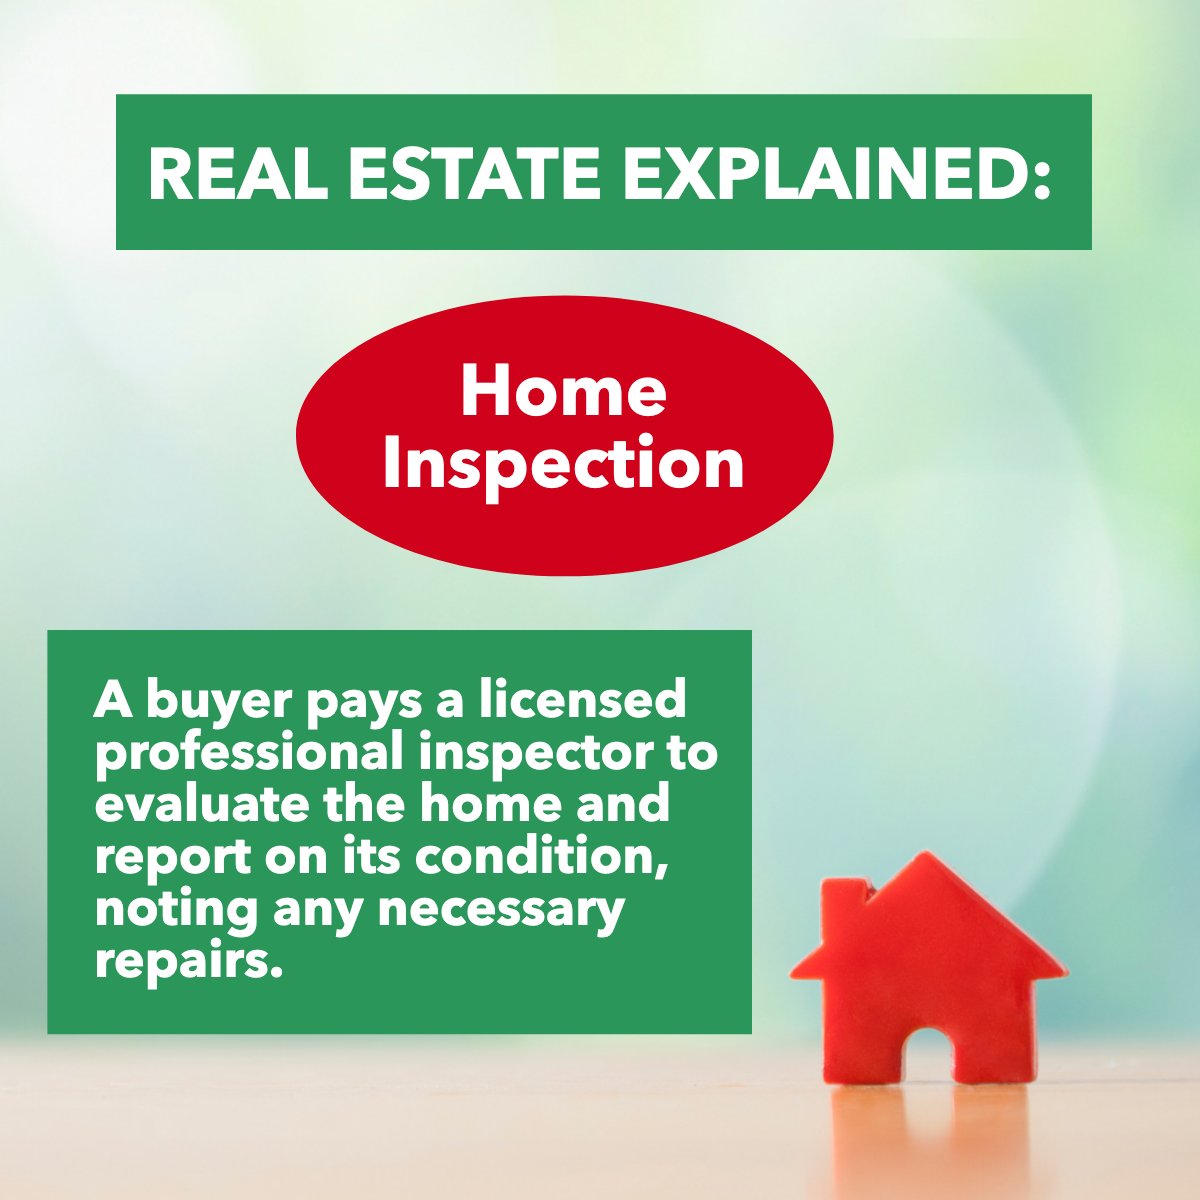 Real Estate Explained: 'Home Inspection' 

Have you had any experience with home inspections

#realestateadvisor     #homeinspectiontime     #homeinspections     #realestate101     #facts 

#scottskarerealtor #exprealtyormondbeach #exprealty #agentsuccessobsessed